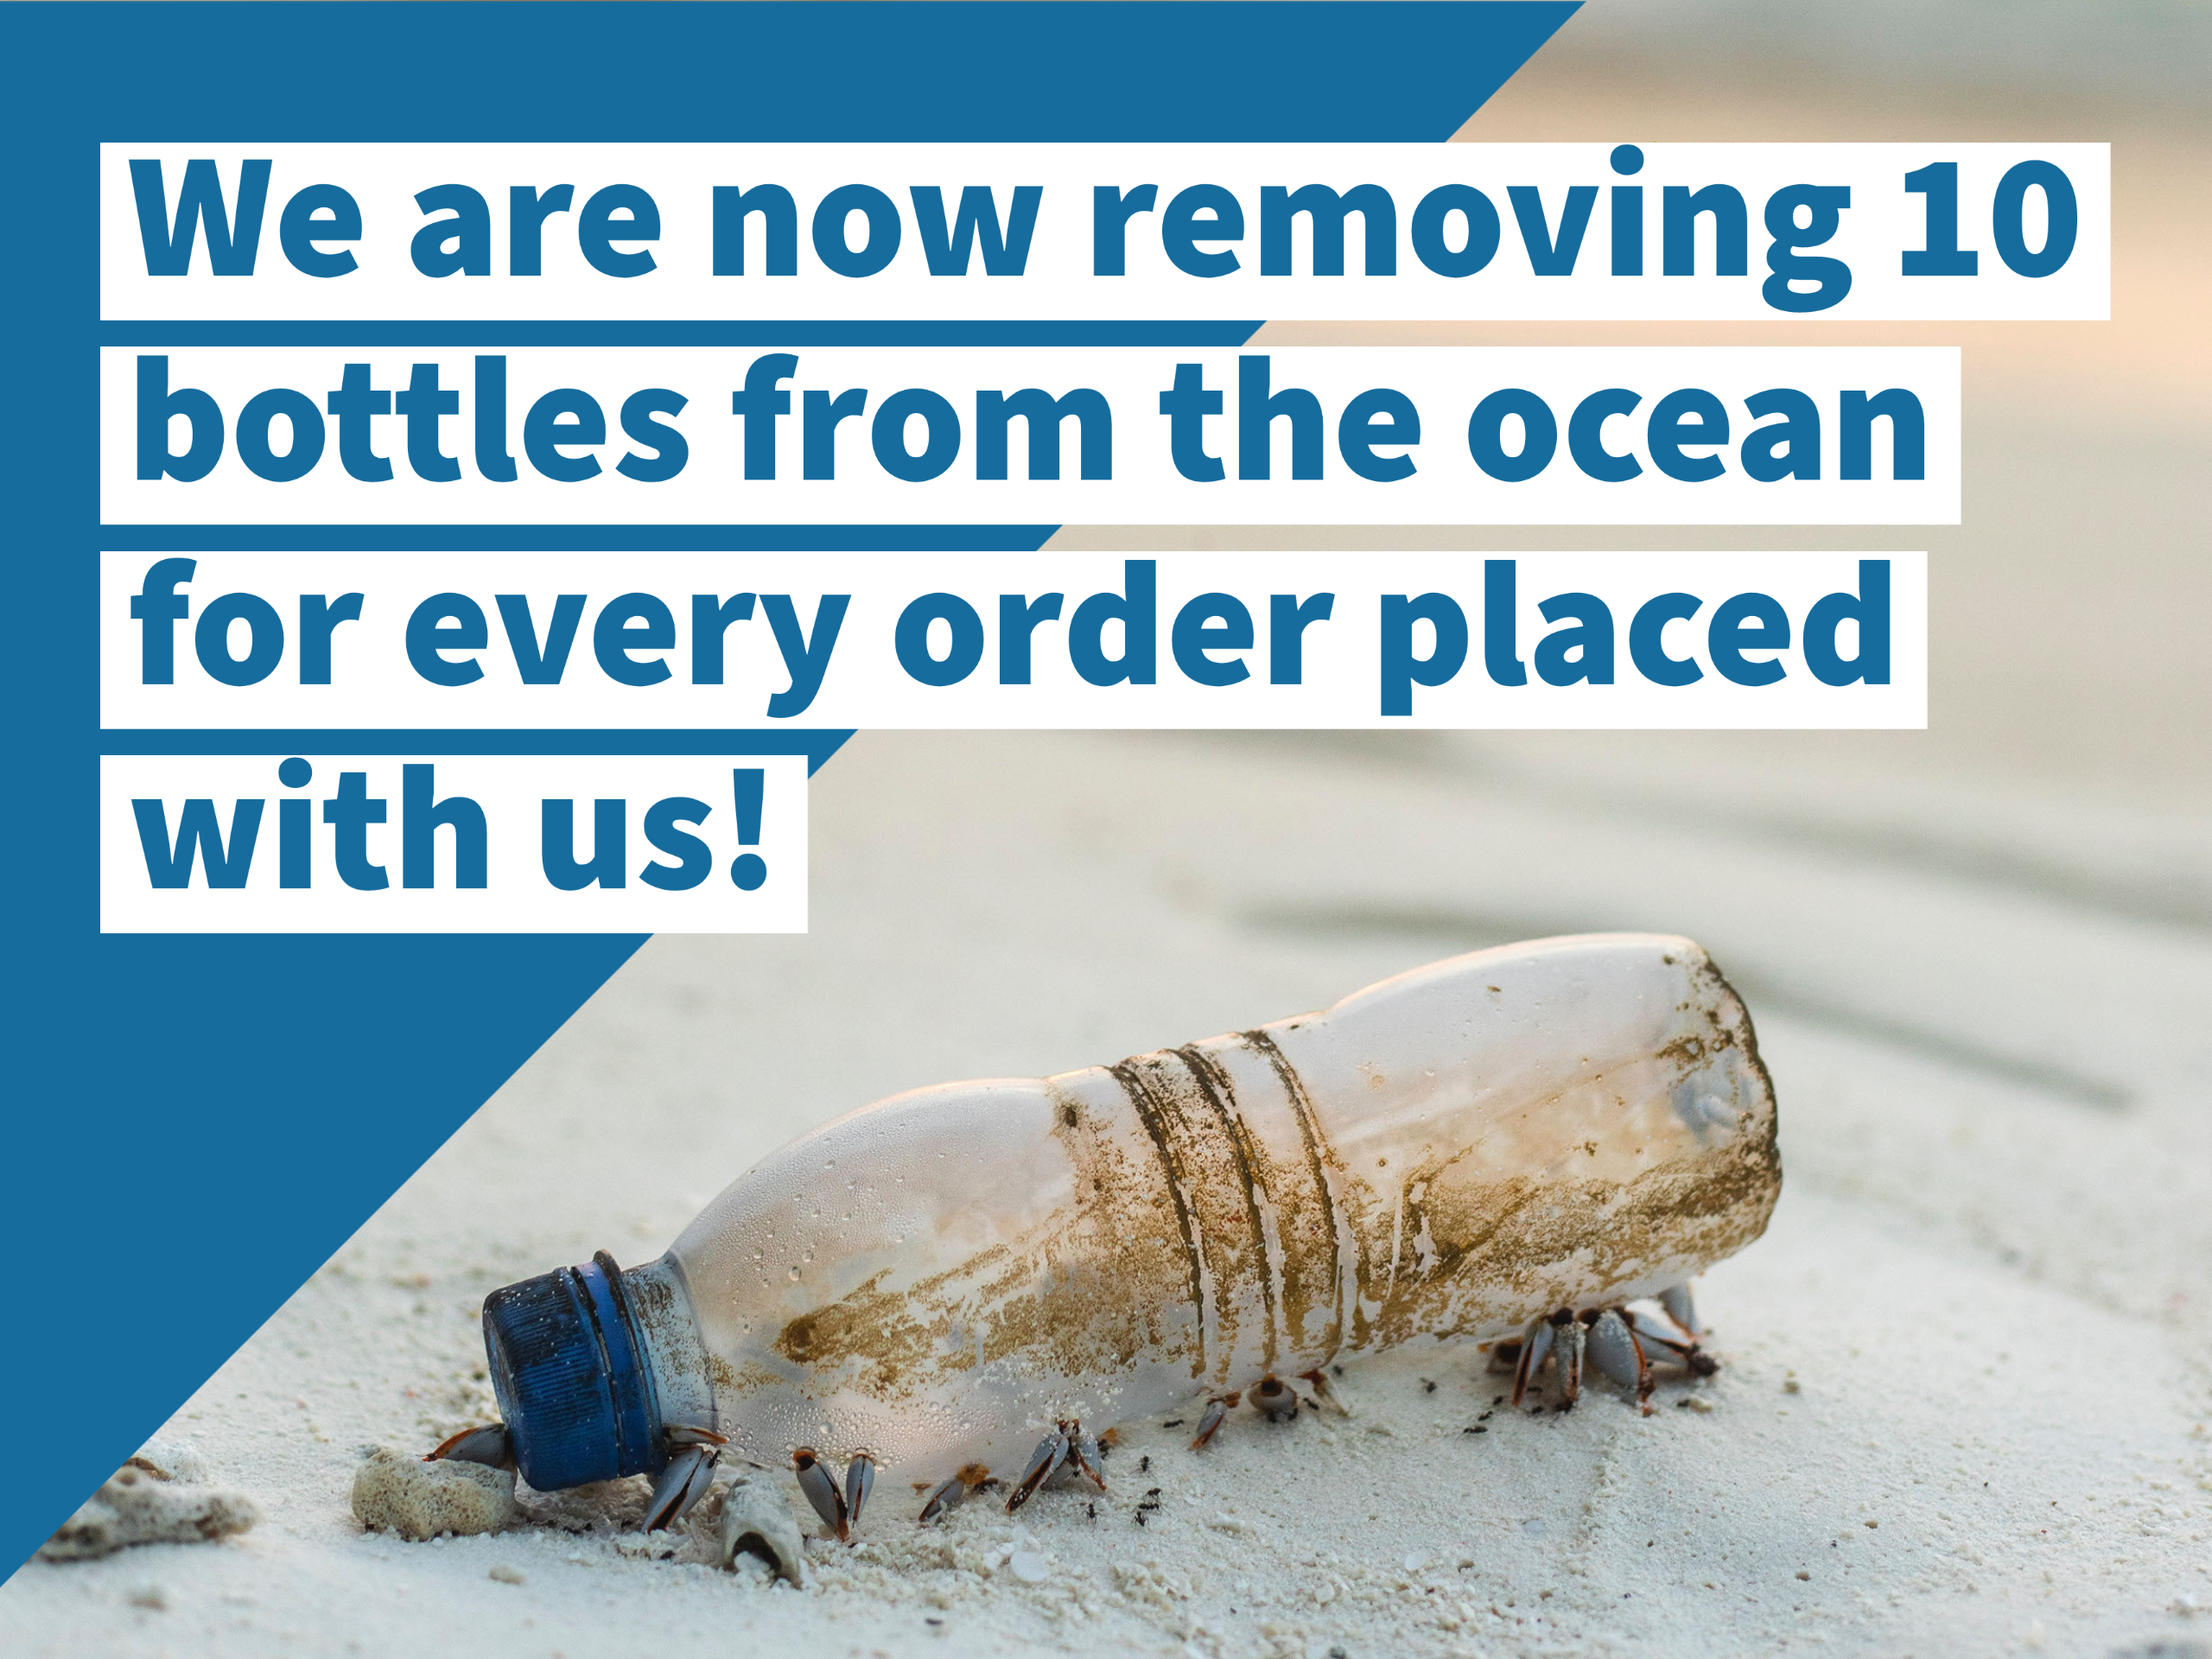 We are now removing 10 bottles from the ocean for every order placed with us